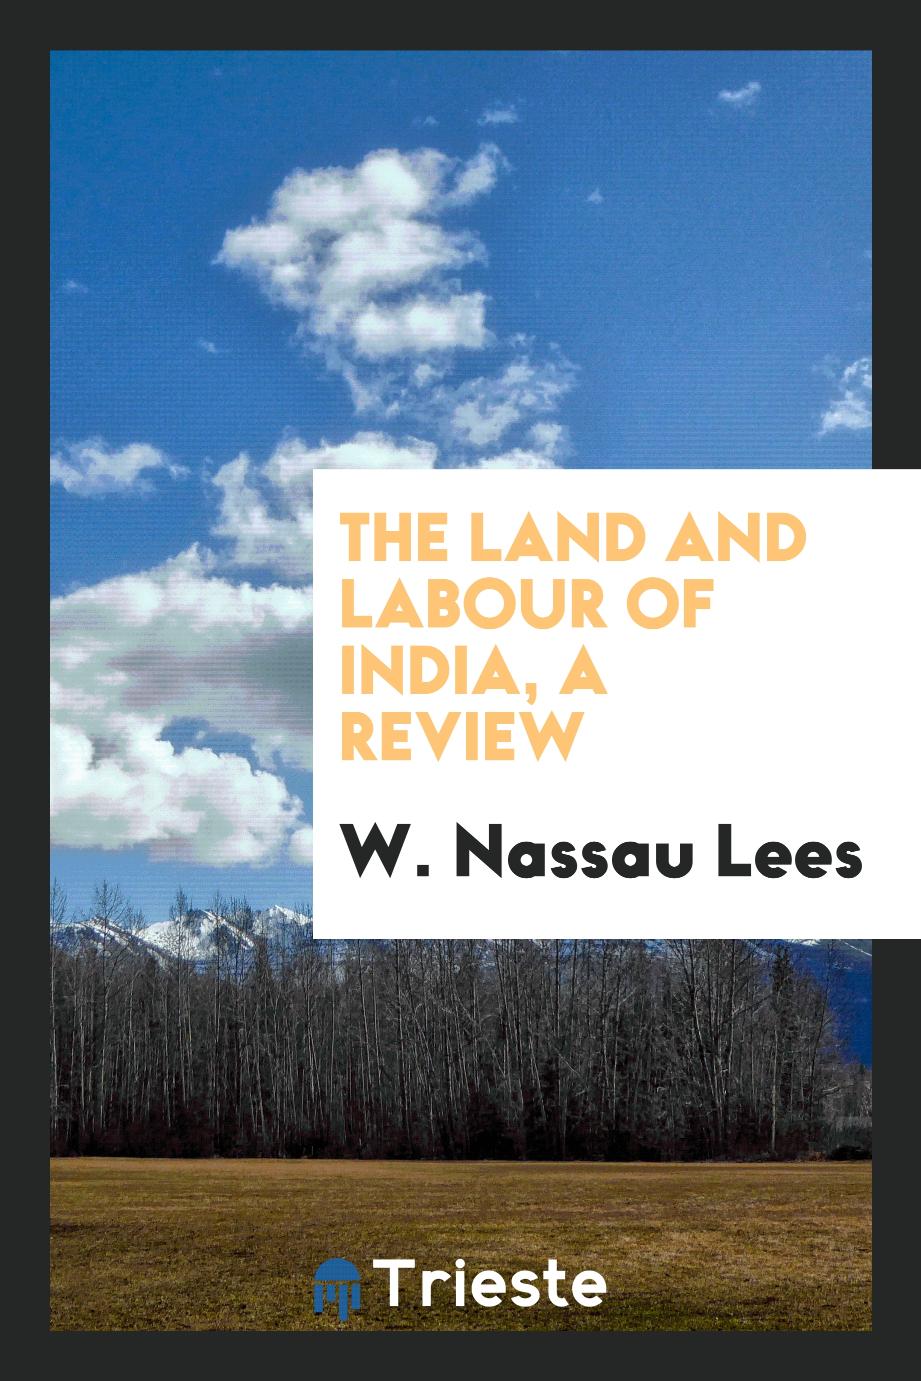 The land and labour of India, a review